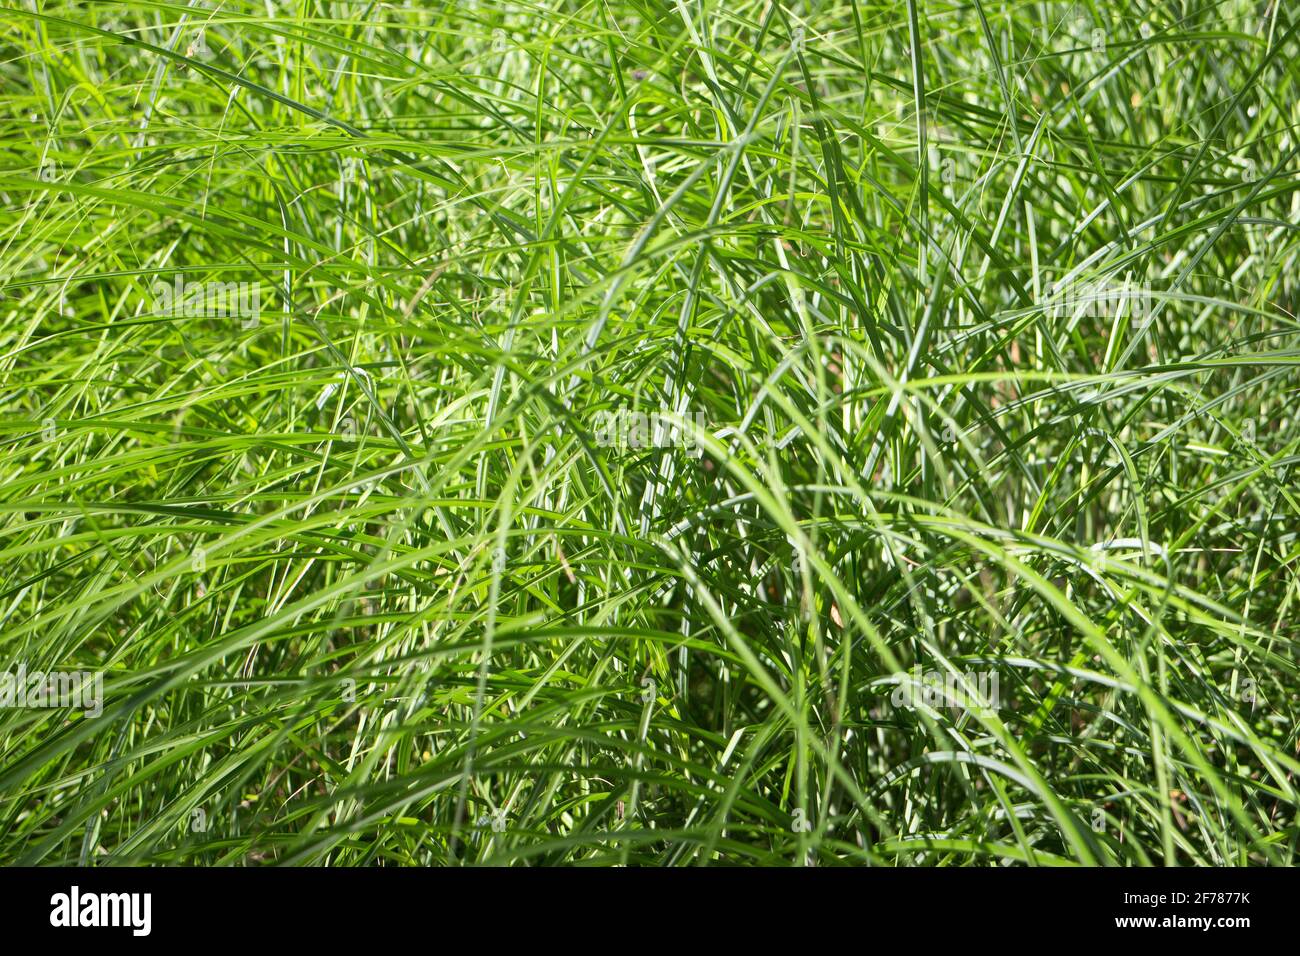 Long and fresh green grass background Stock Photo